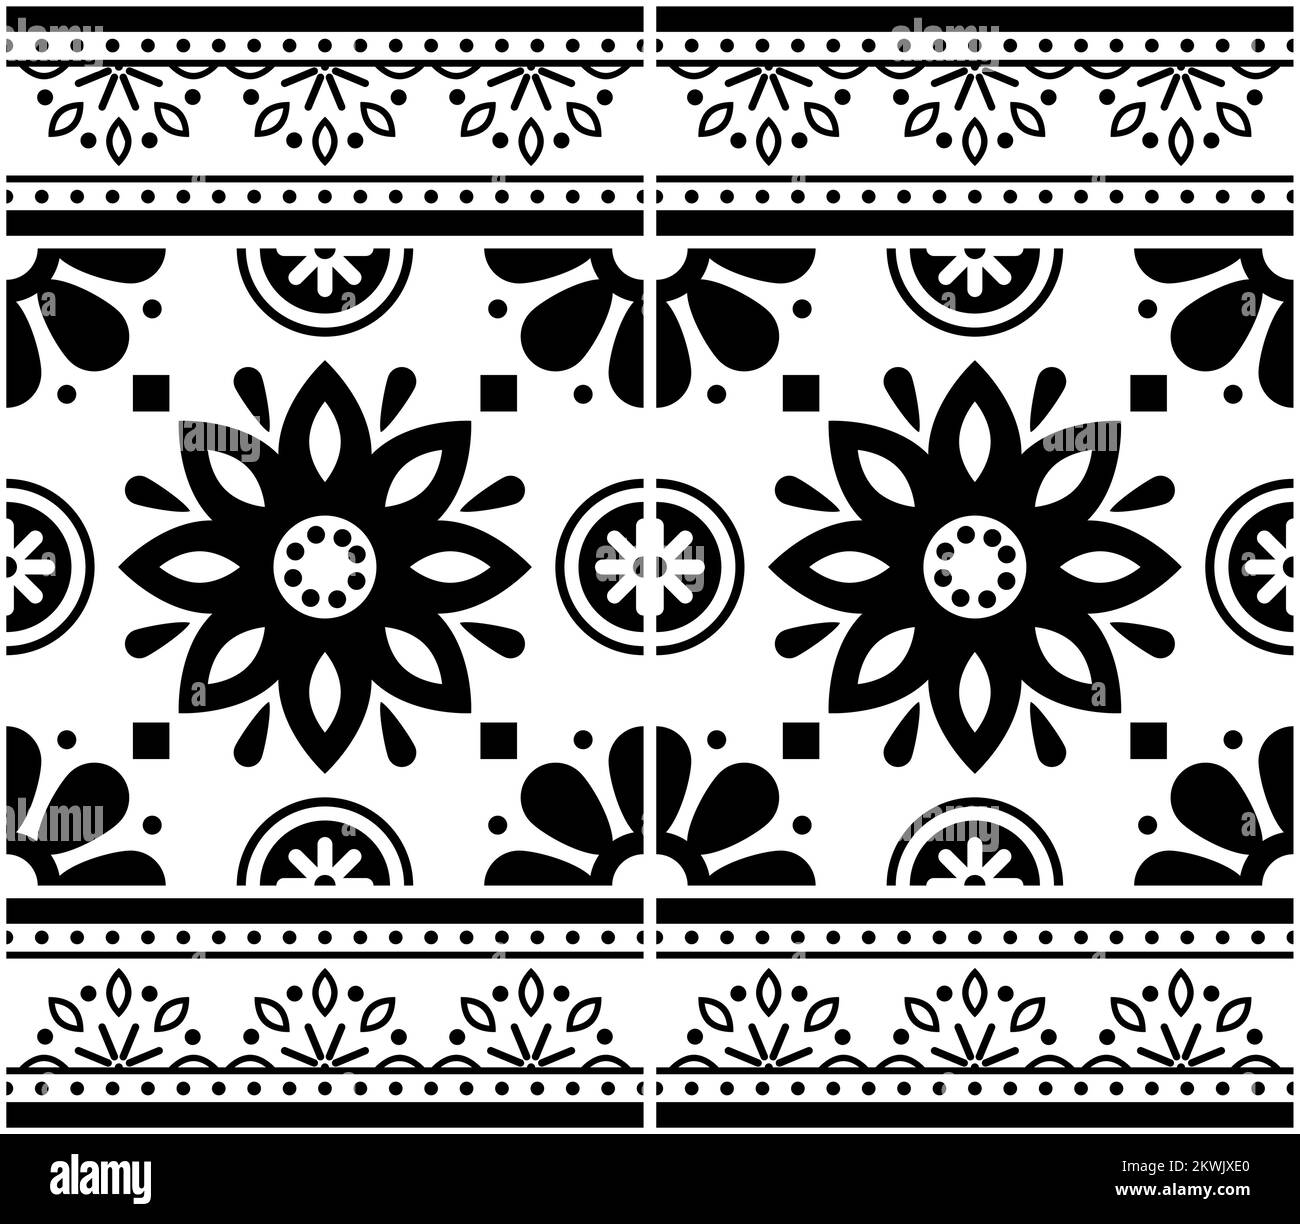 Portuguese Azulejo tiles seamless vector floral pattern with frame or border - decorative tile retro design with flowers in black and white Stock Vector